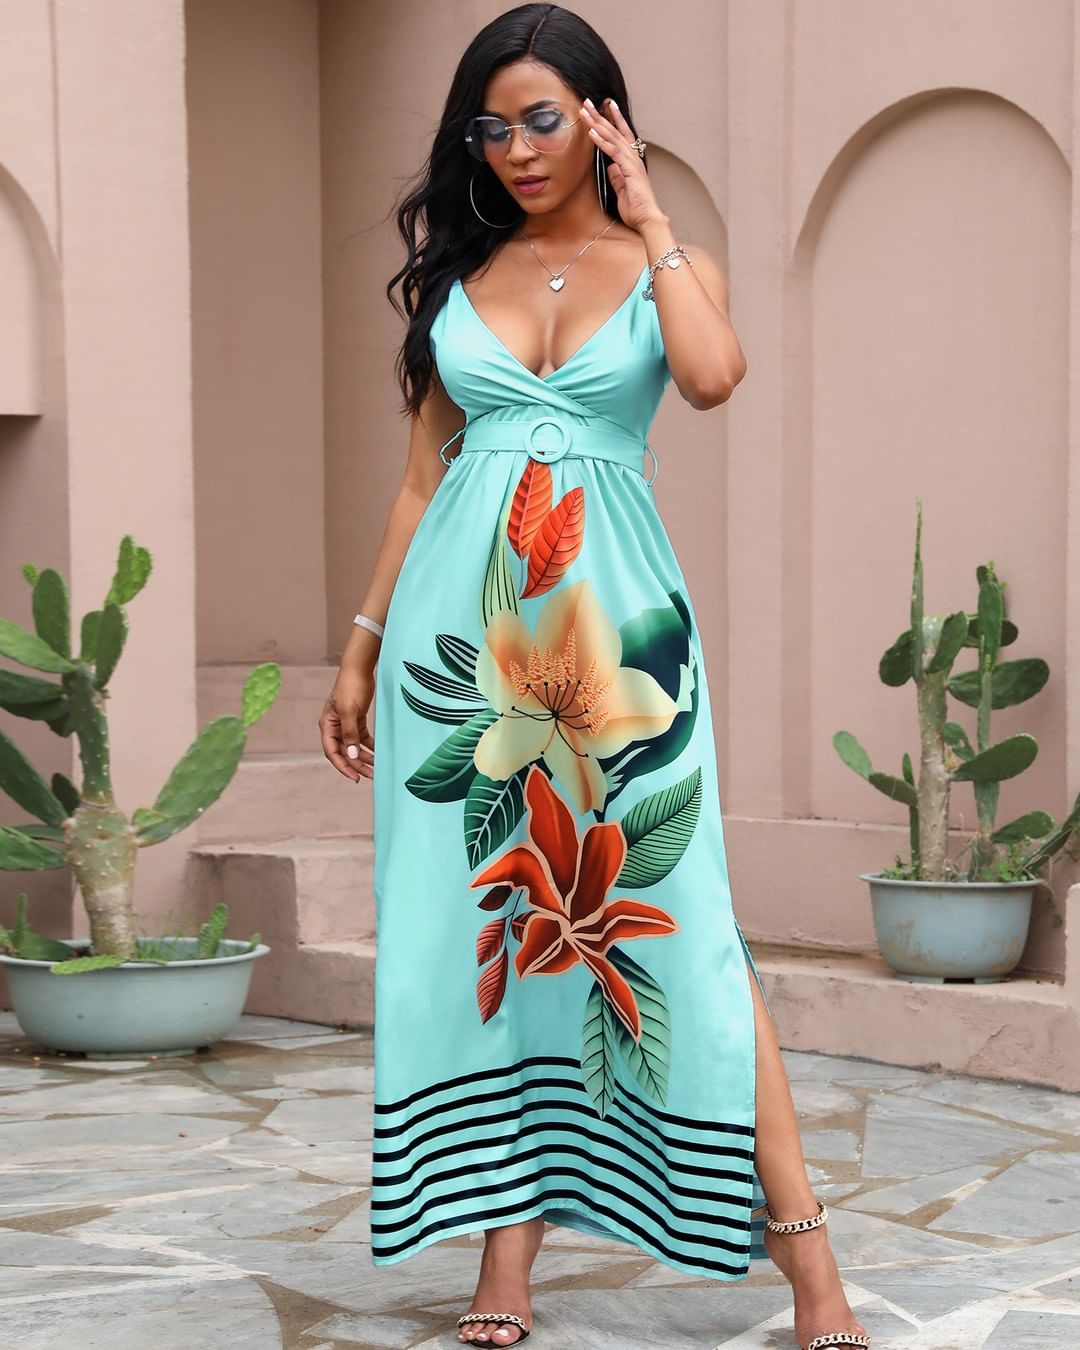 Chic Me - There's no such thing as having too many floral dresses⁠💐⁠
🔍"LZZ2483"⁠
Shop: ChicMe.com⁠
⁠
#chicmeofficial #fashion #lovecurves #ootd #style #chic #fashionmoment